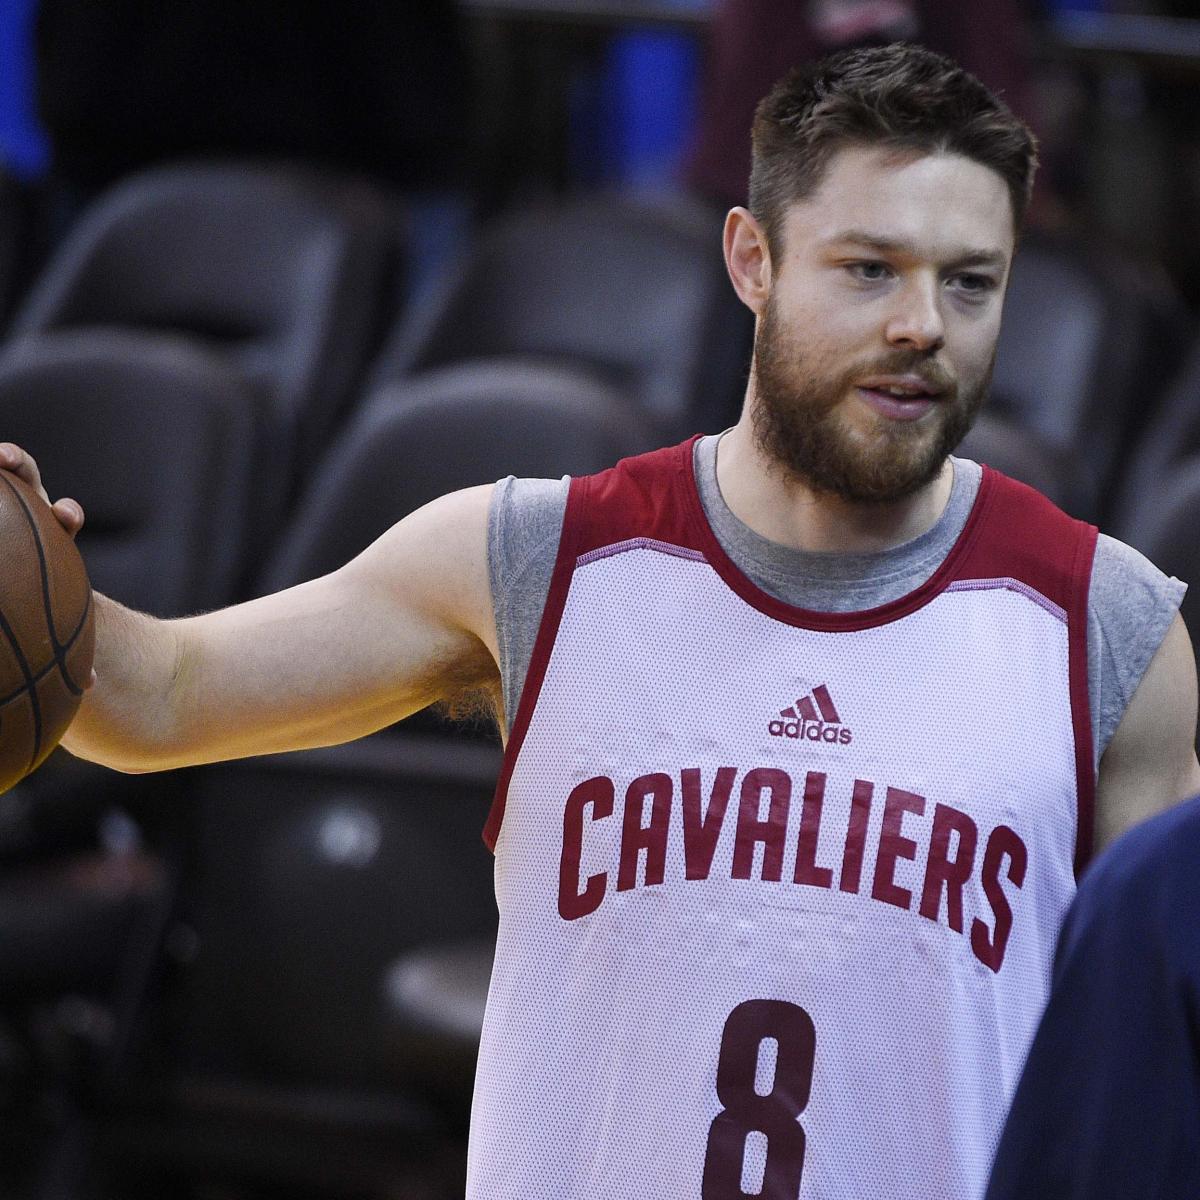 Cleveland Cavaliers Bus Leaves Without Matthew Dellavedova After Game 1 Loss ...1200 x 1200